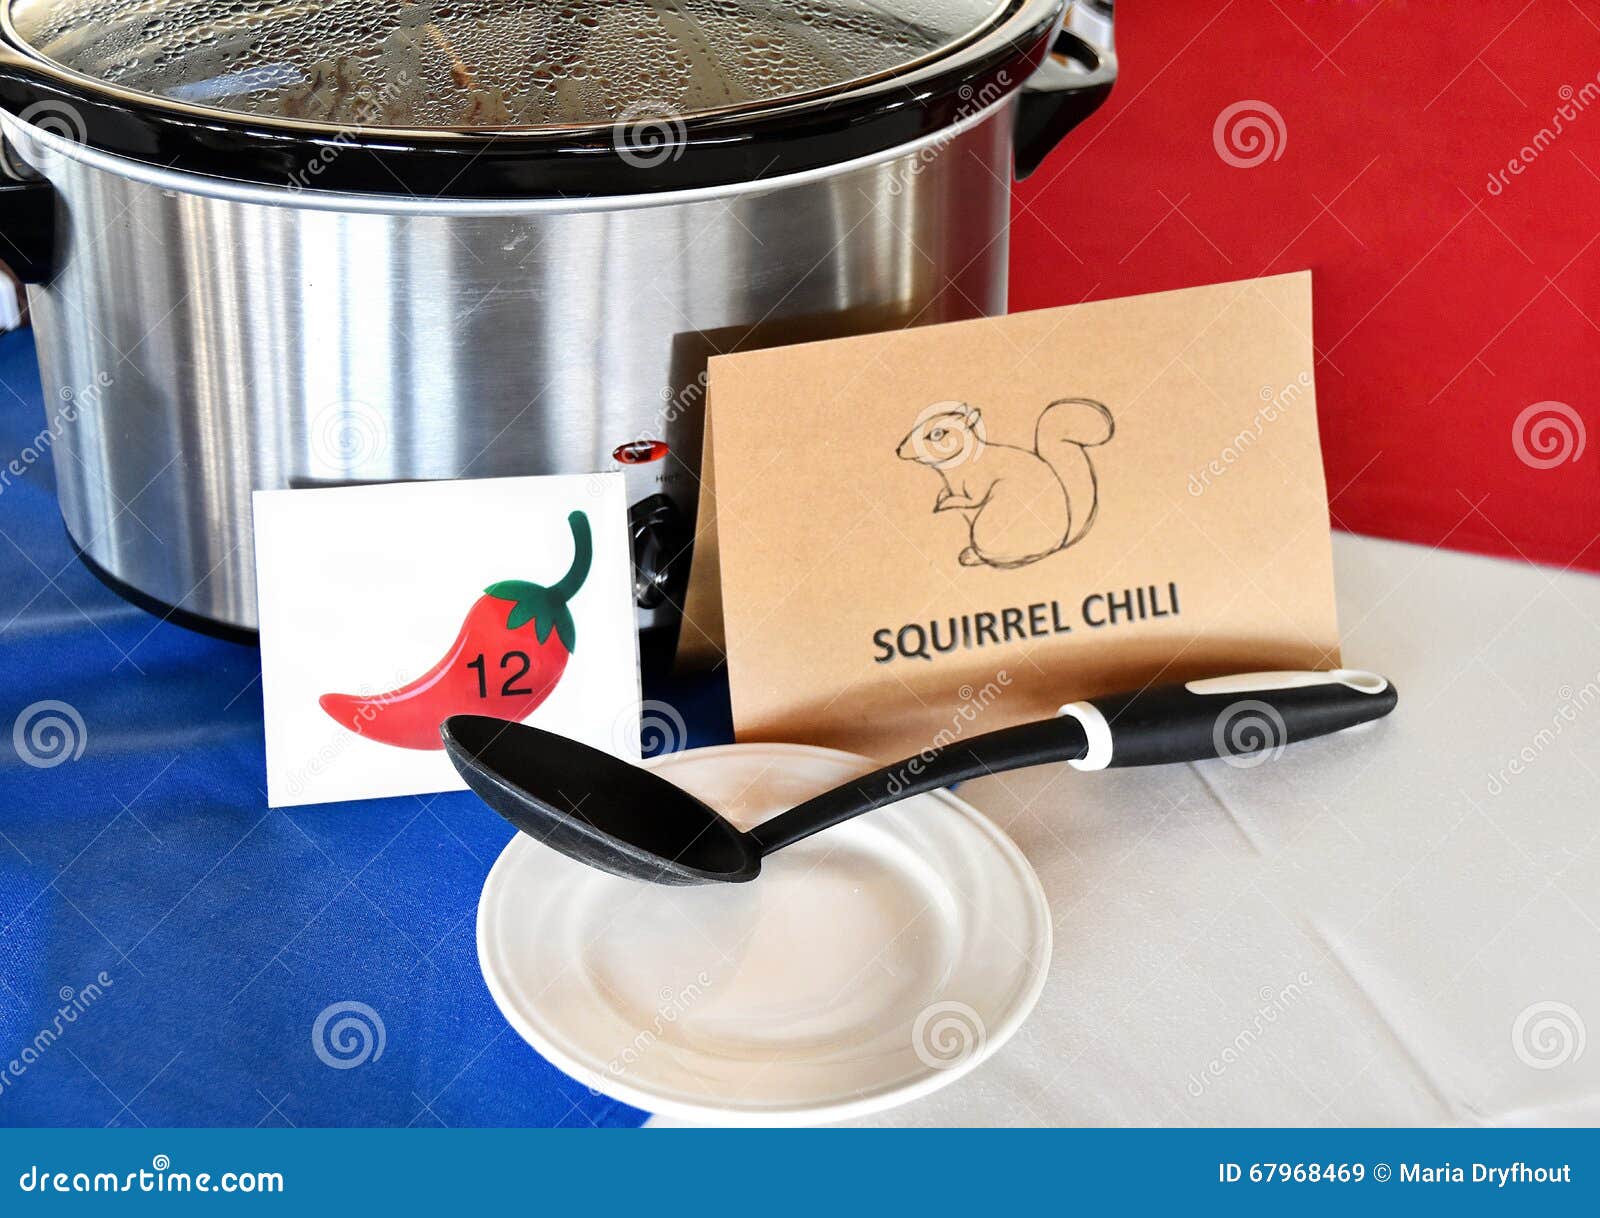 39+ Thousand Chili Pot Royalty-Free Images, Stock Photos & Pictures